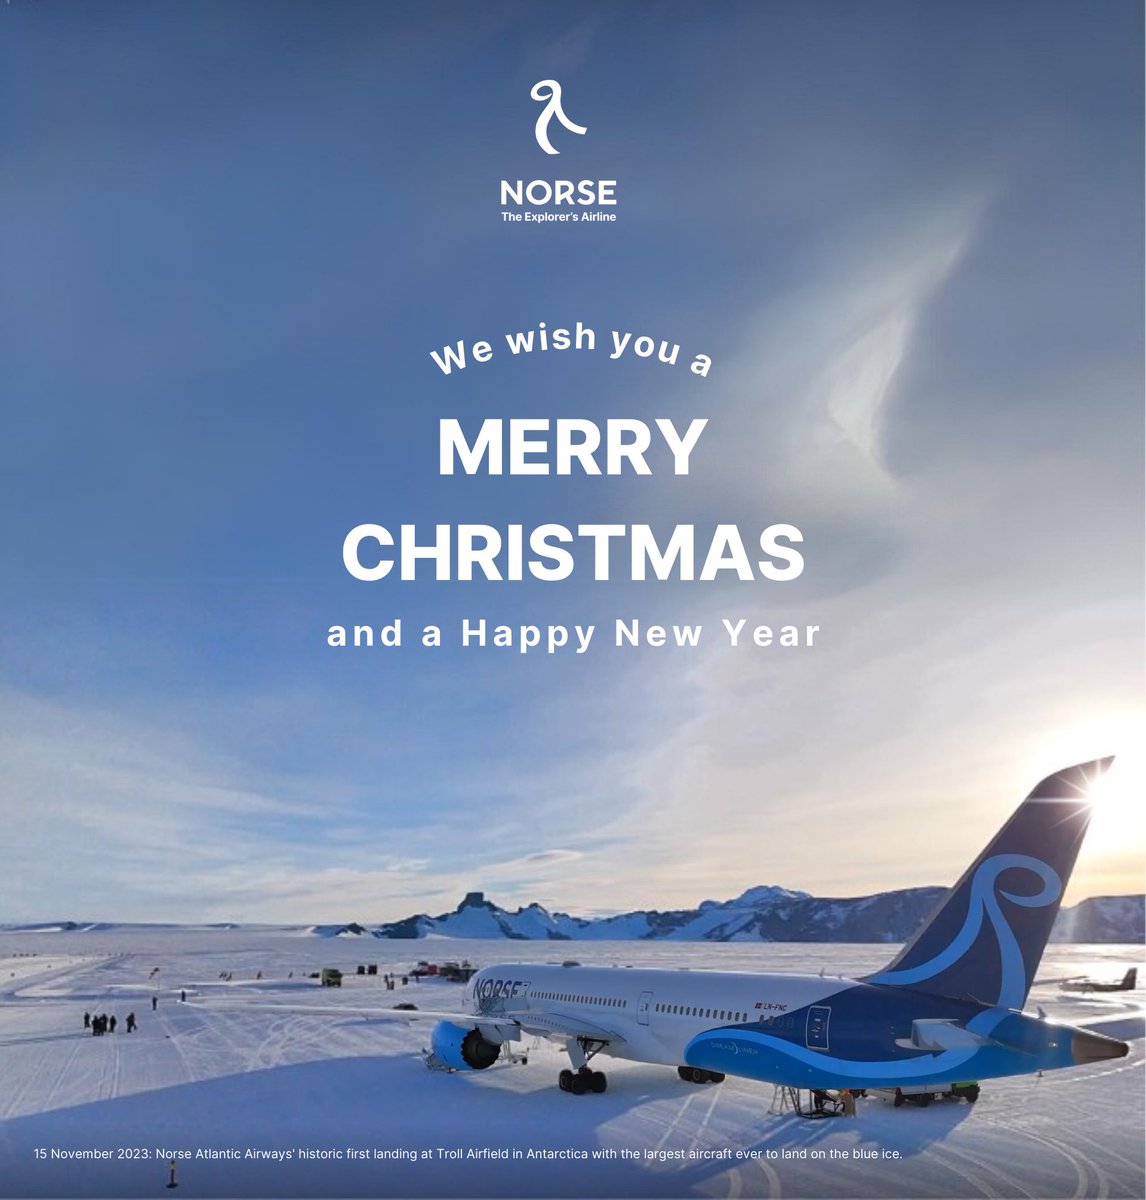 Merry Christmas from the whole team here at Norse. It's been a lovely year flying with you, and we can't wait for many adventures to come in 2024…✈️ #flynorse